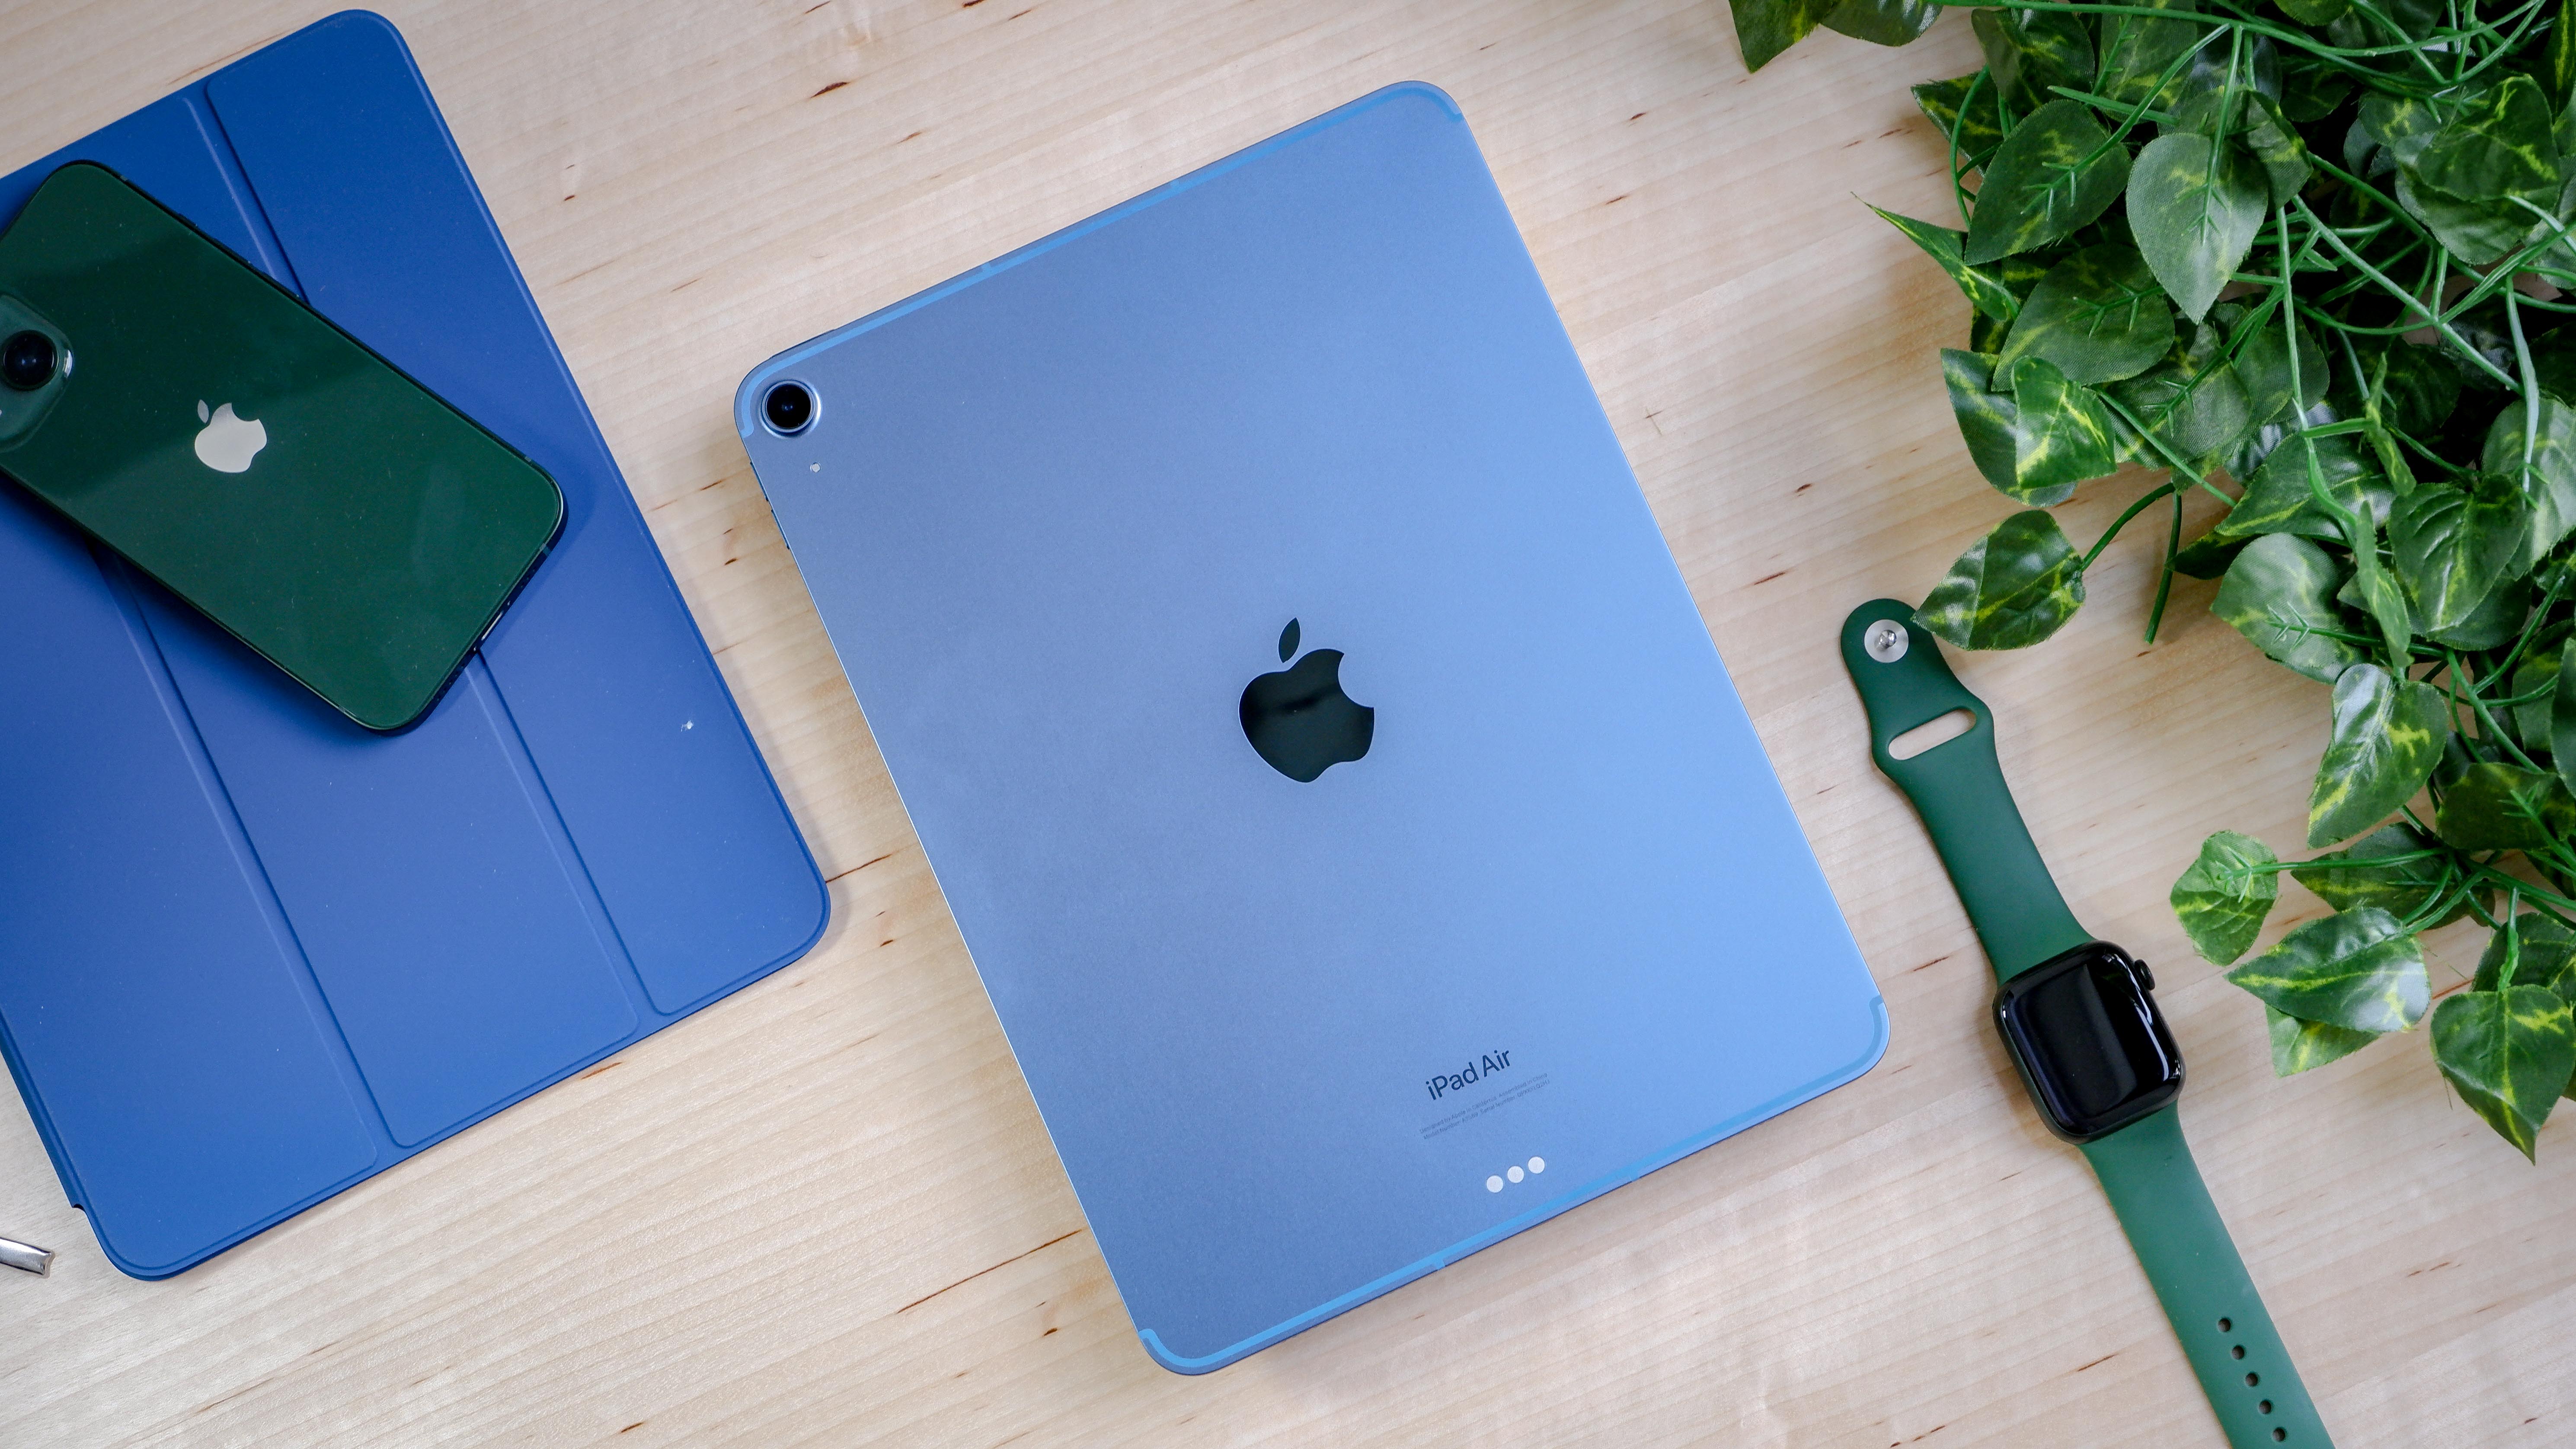 Apple iPad 2022 — analyst just tipped a big redesign for this year